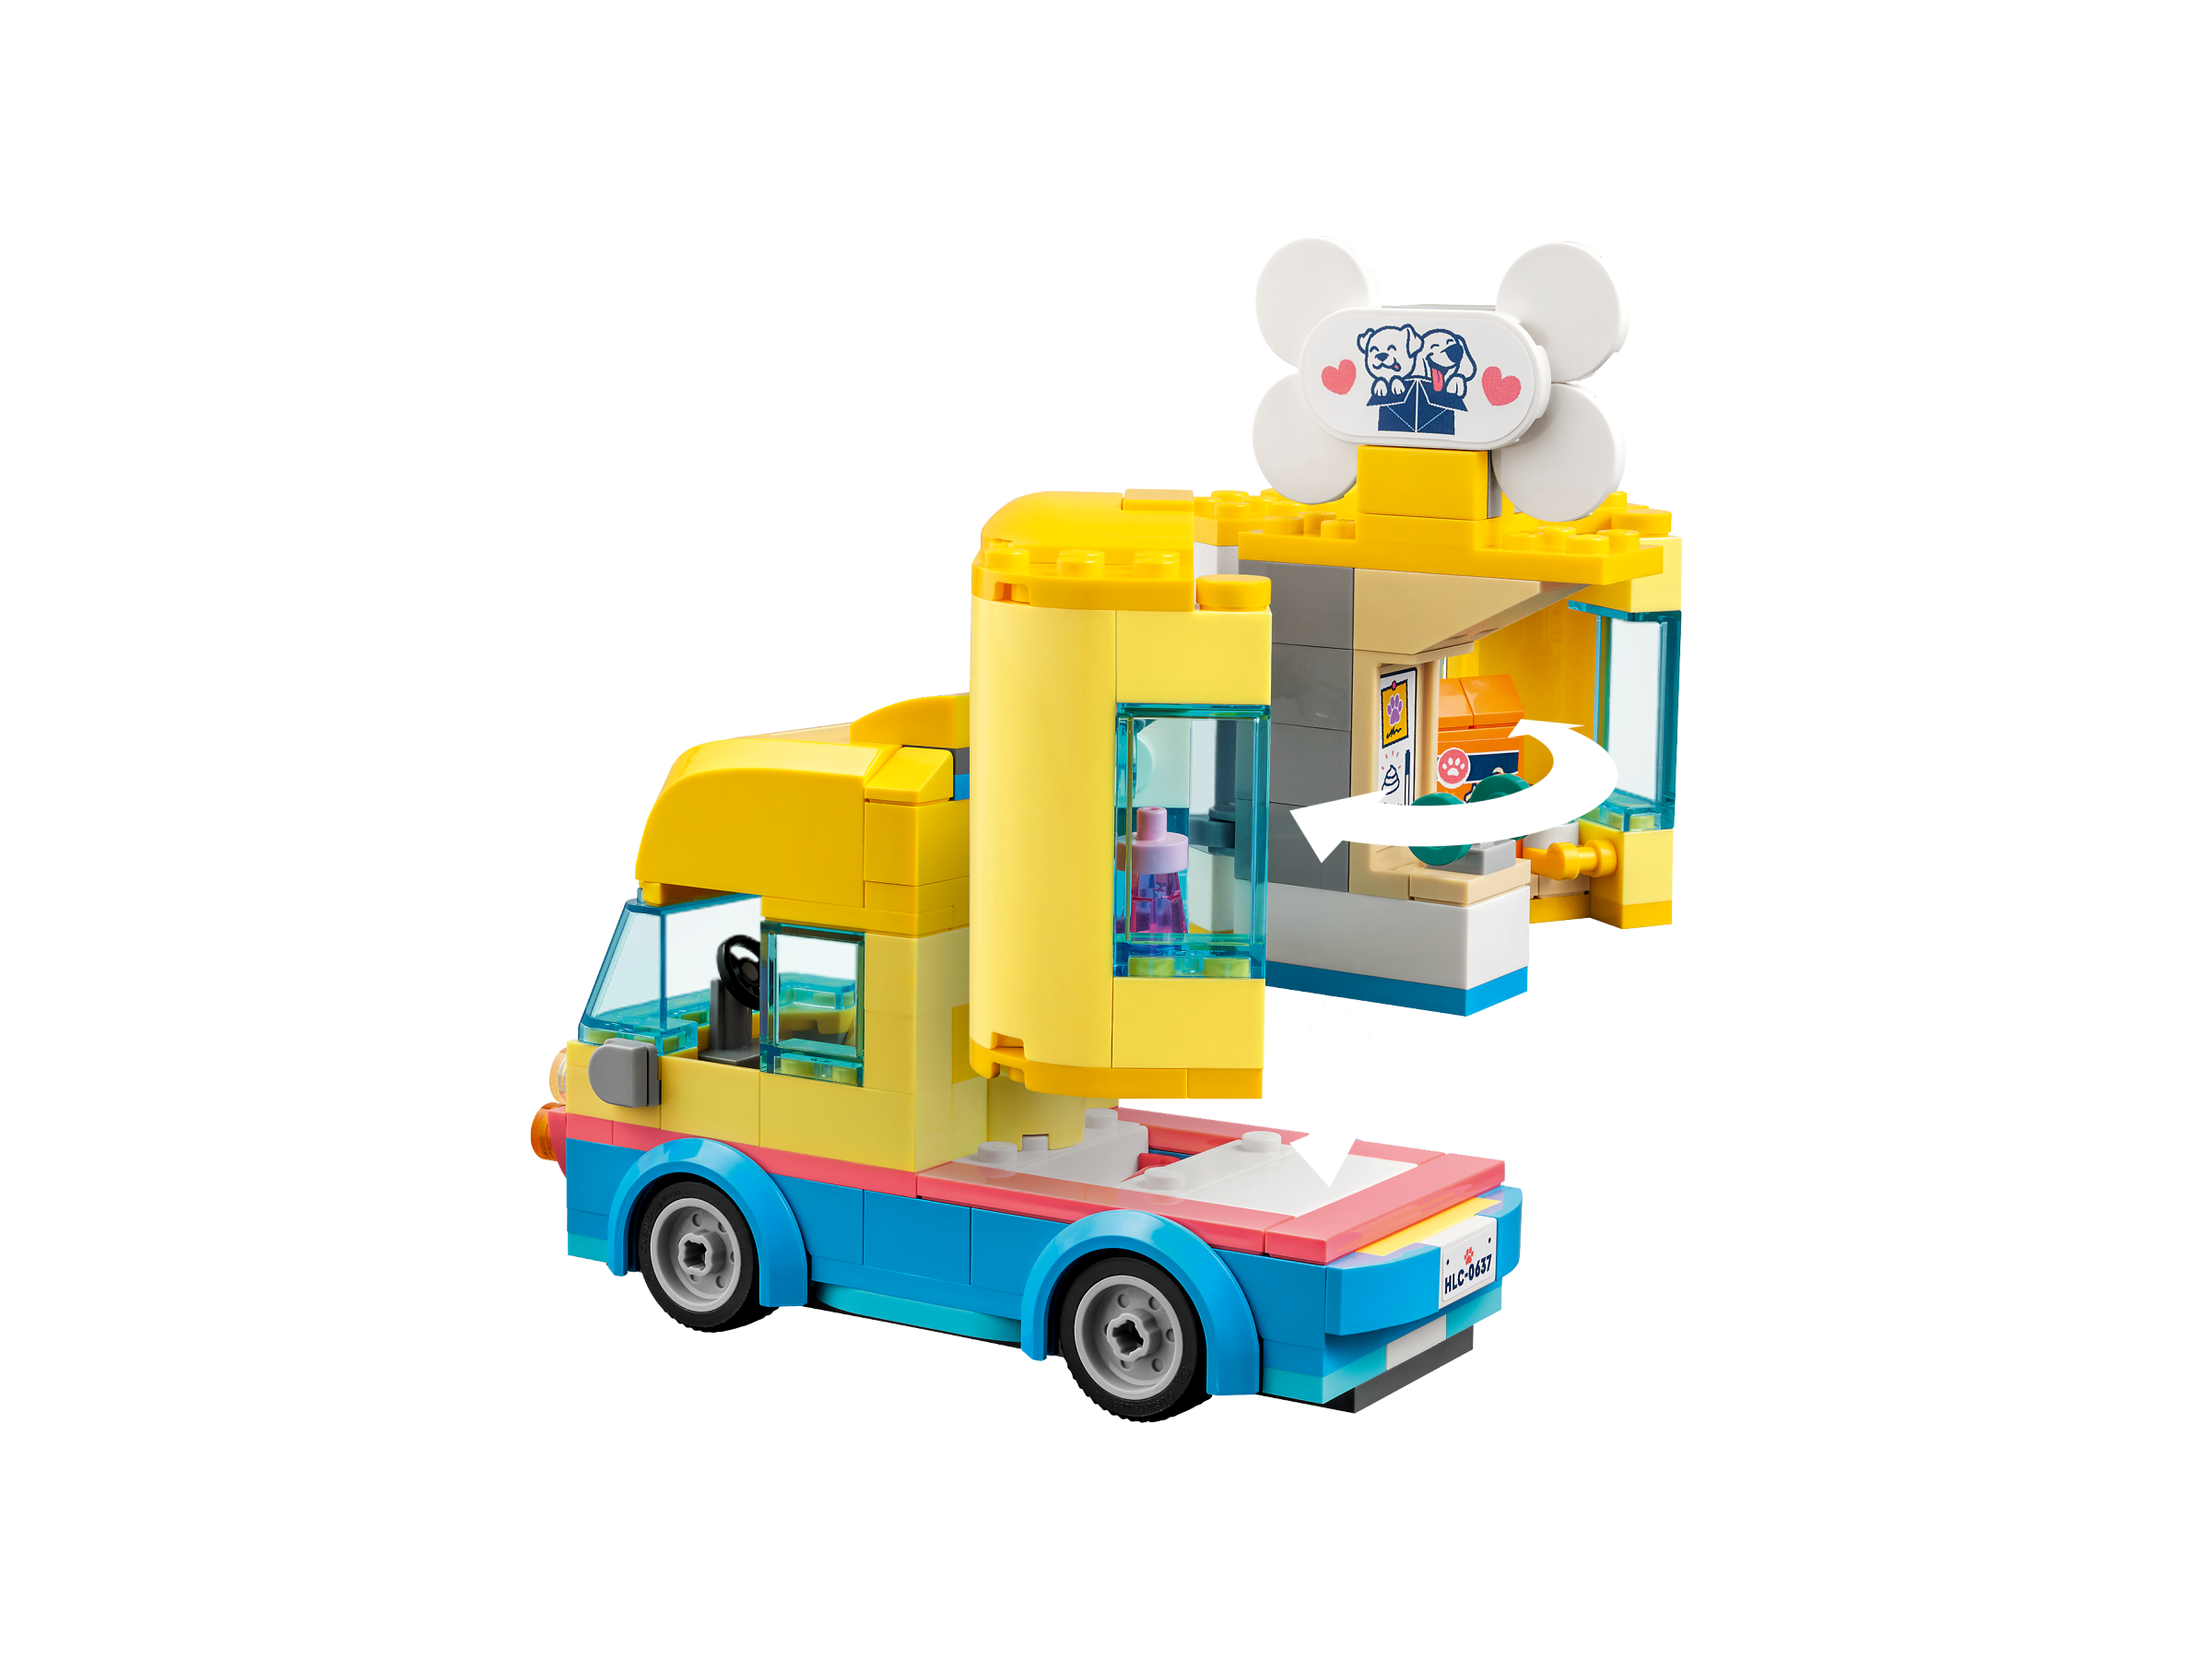 Dog Rescue Van 41741 | Friends | Buy online at the Official LEGO® Shop US